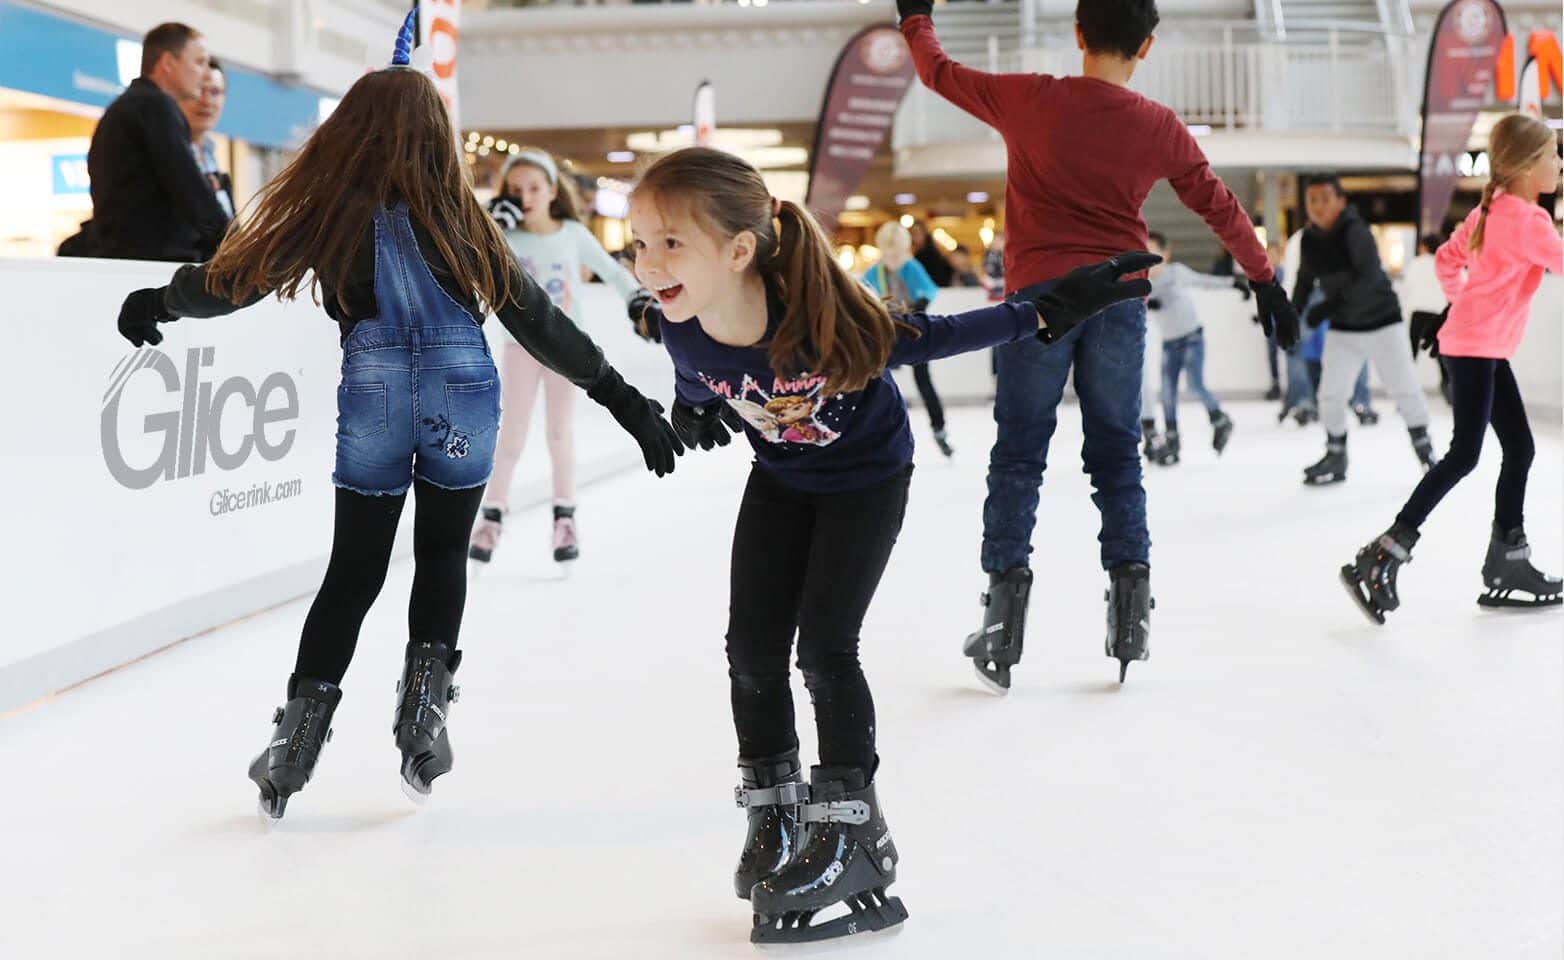 Children having fun on synthetic ice rink at Swiss mall